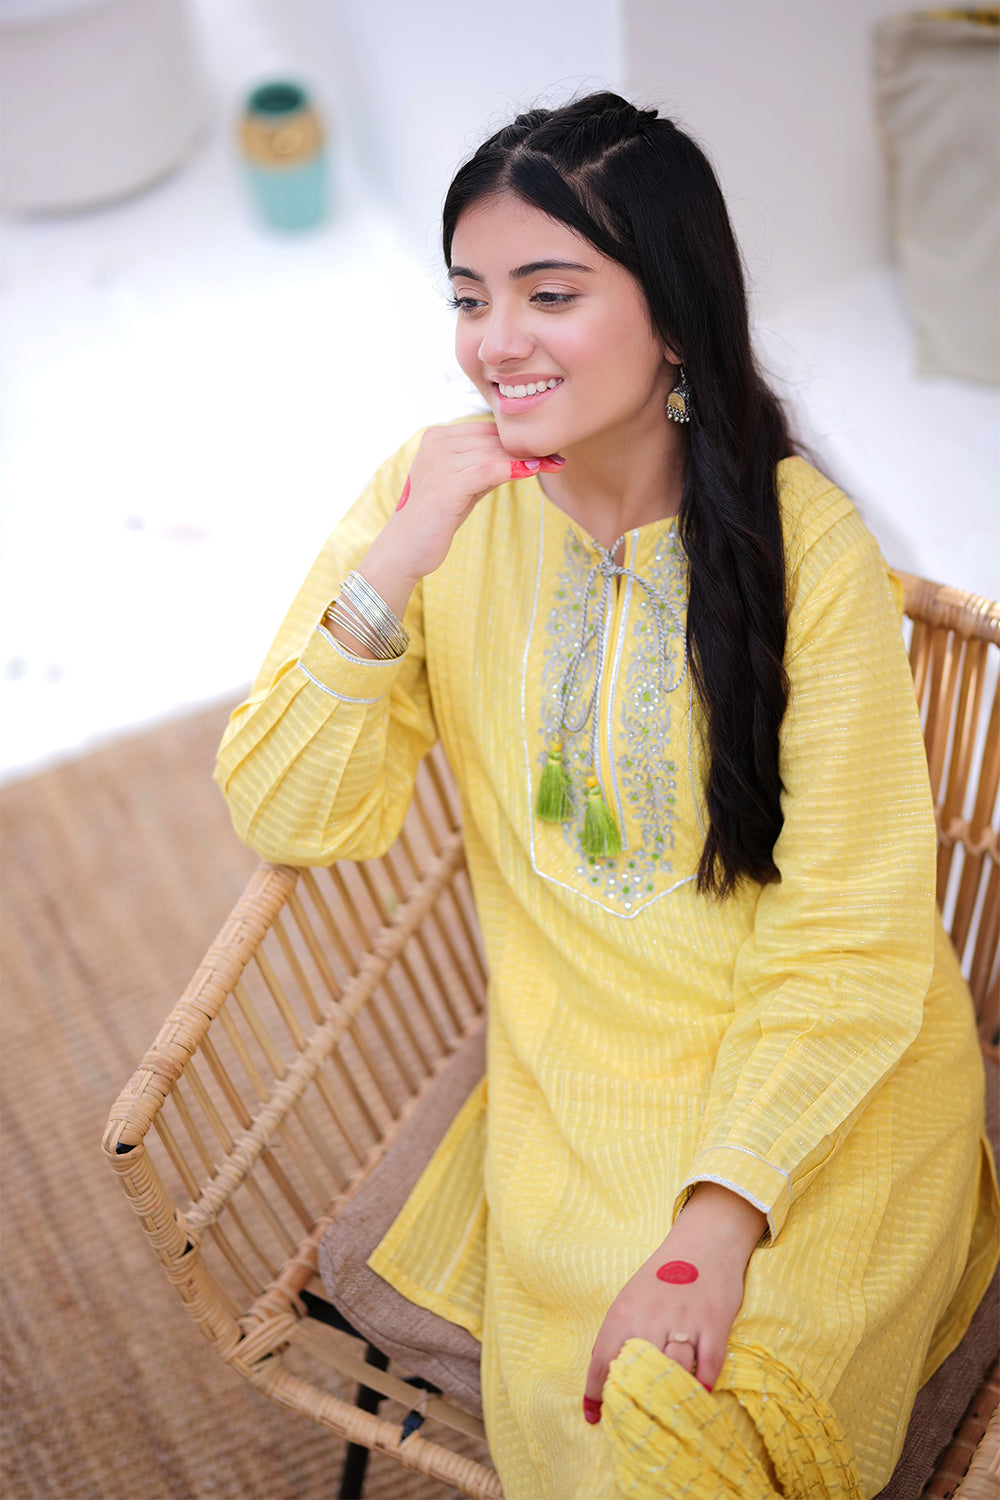 GBD-02246 | Yellow & Silver | Casual 3 Piece Suit | Cotton Dobby Lurex